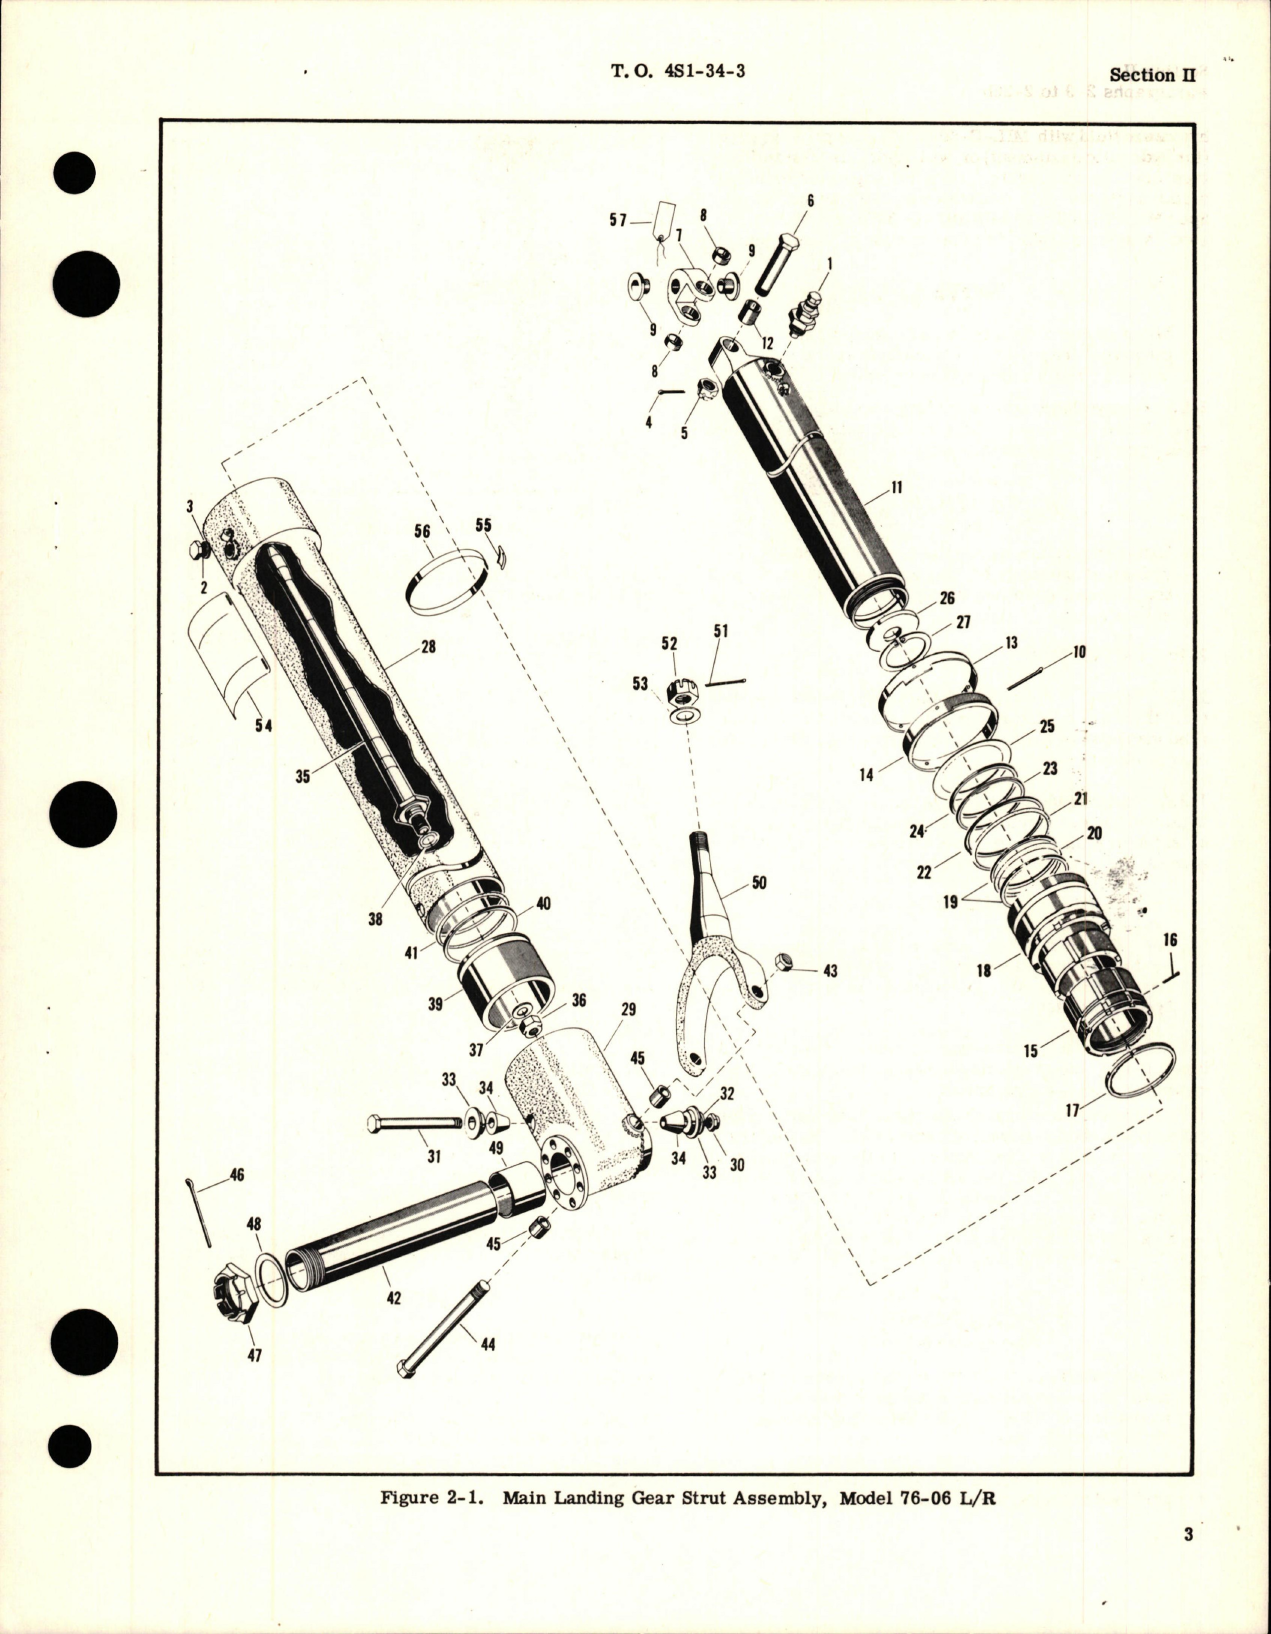 Sample page 5 from AirCorps Library document: Overhaul Instructions for Main Landing Gear Strut Assembly - Models 76-02, 76-04, and 76-06